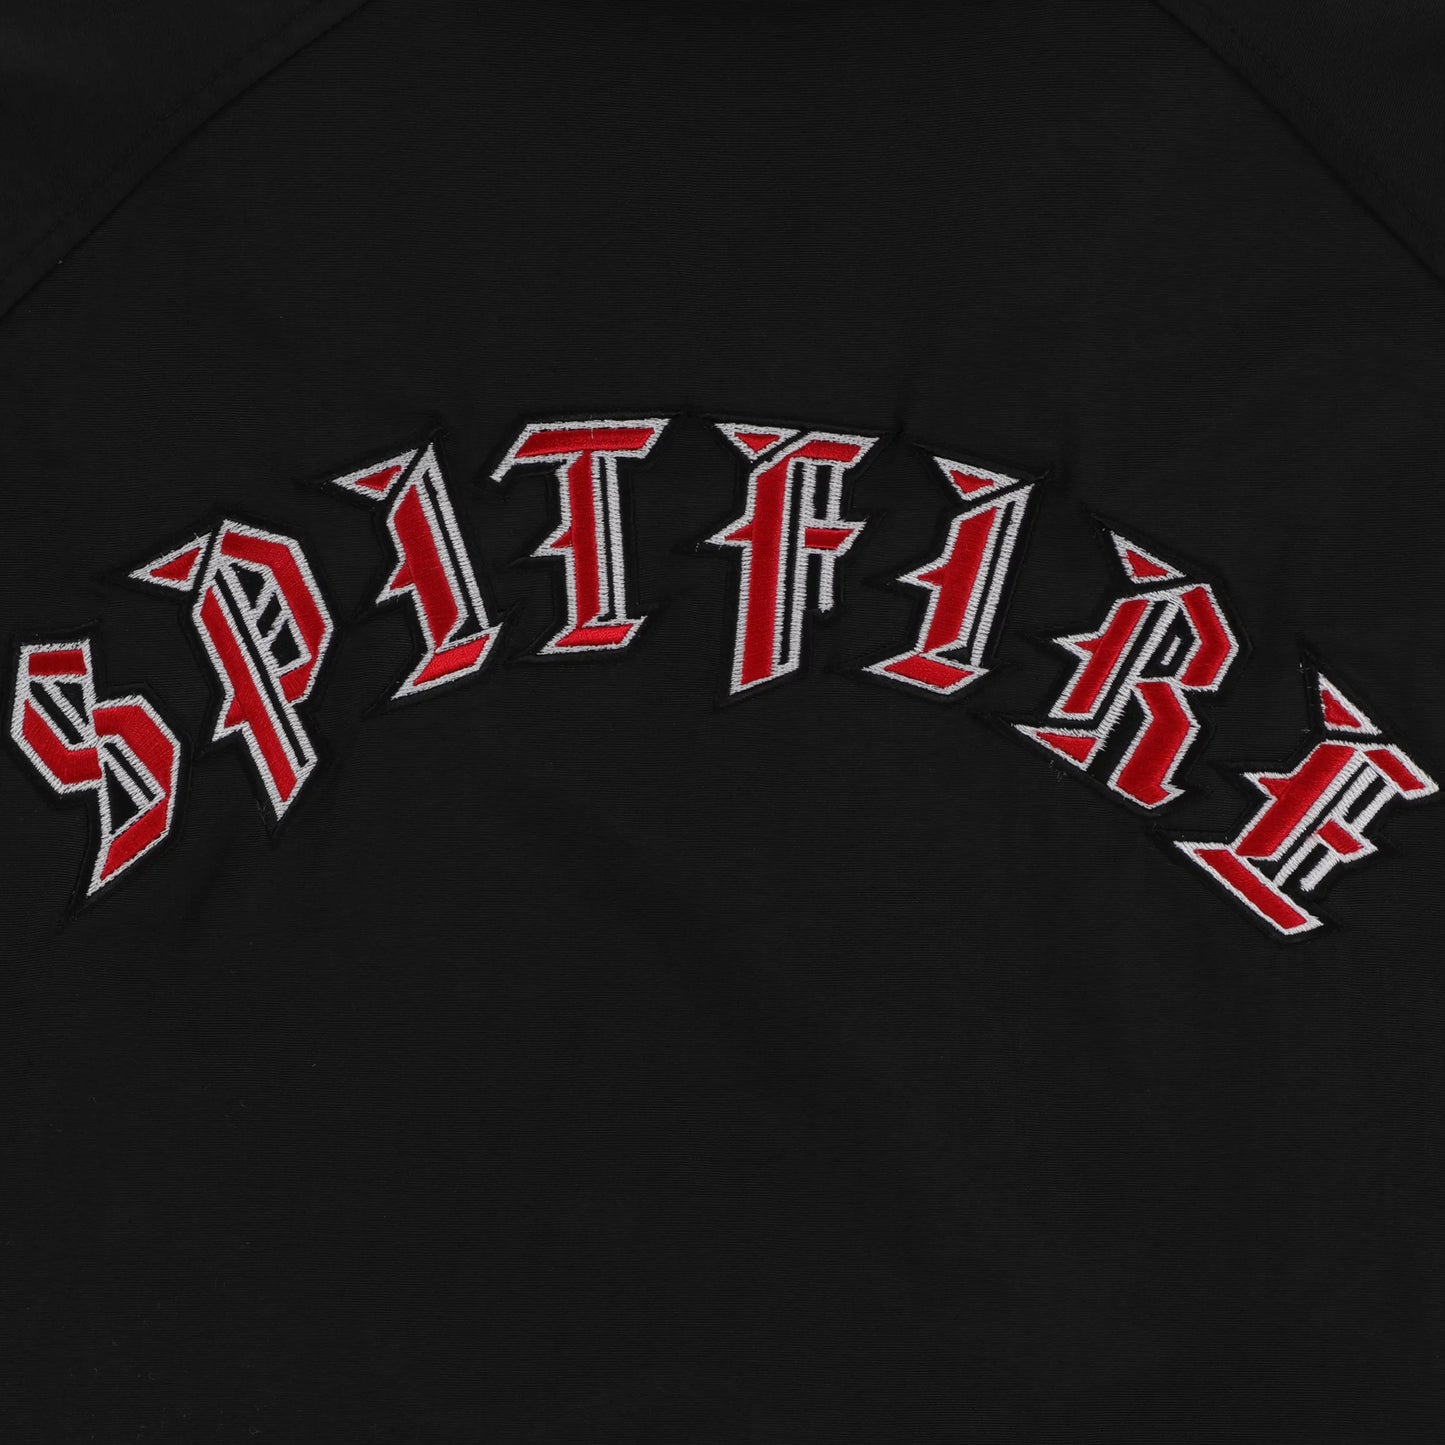 SPITFIRE WHEEL JACKET OLD ENGLISH EMBROIDERED BLACK/RED/WHITE